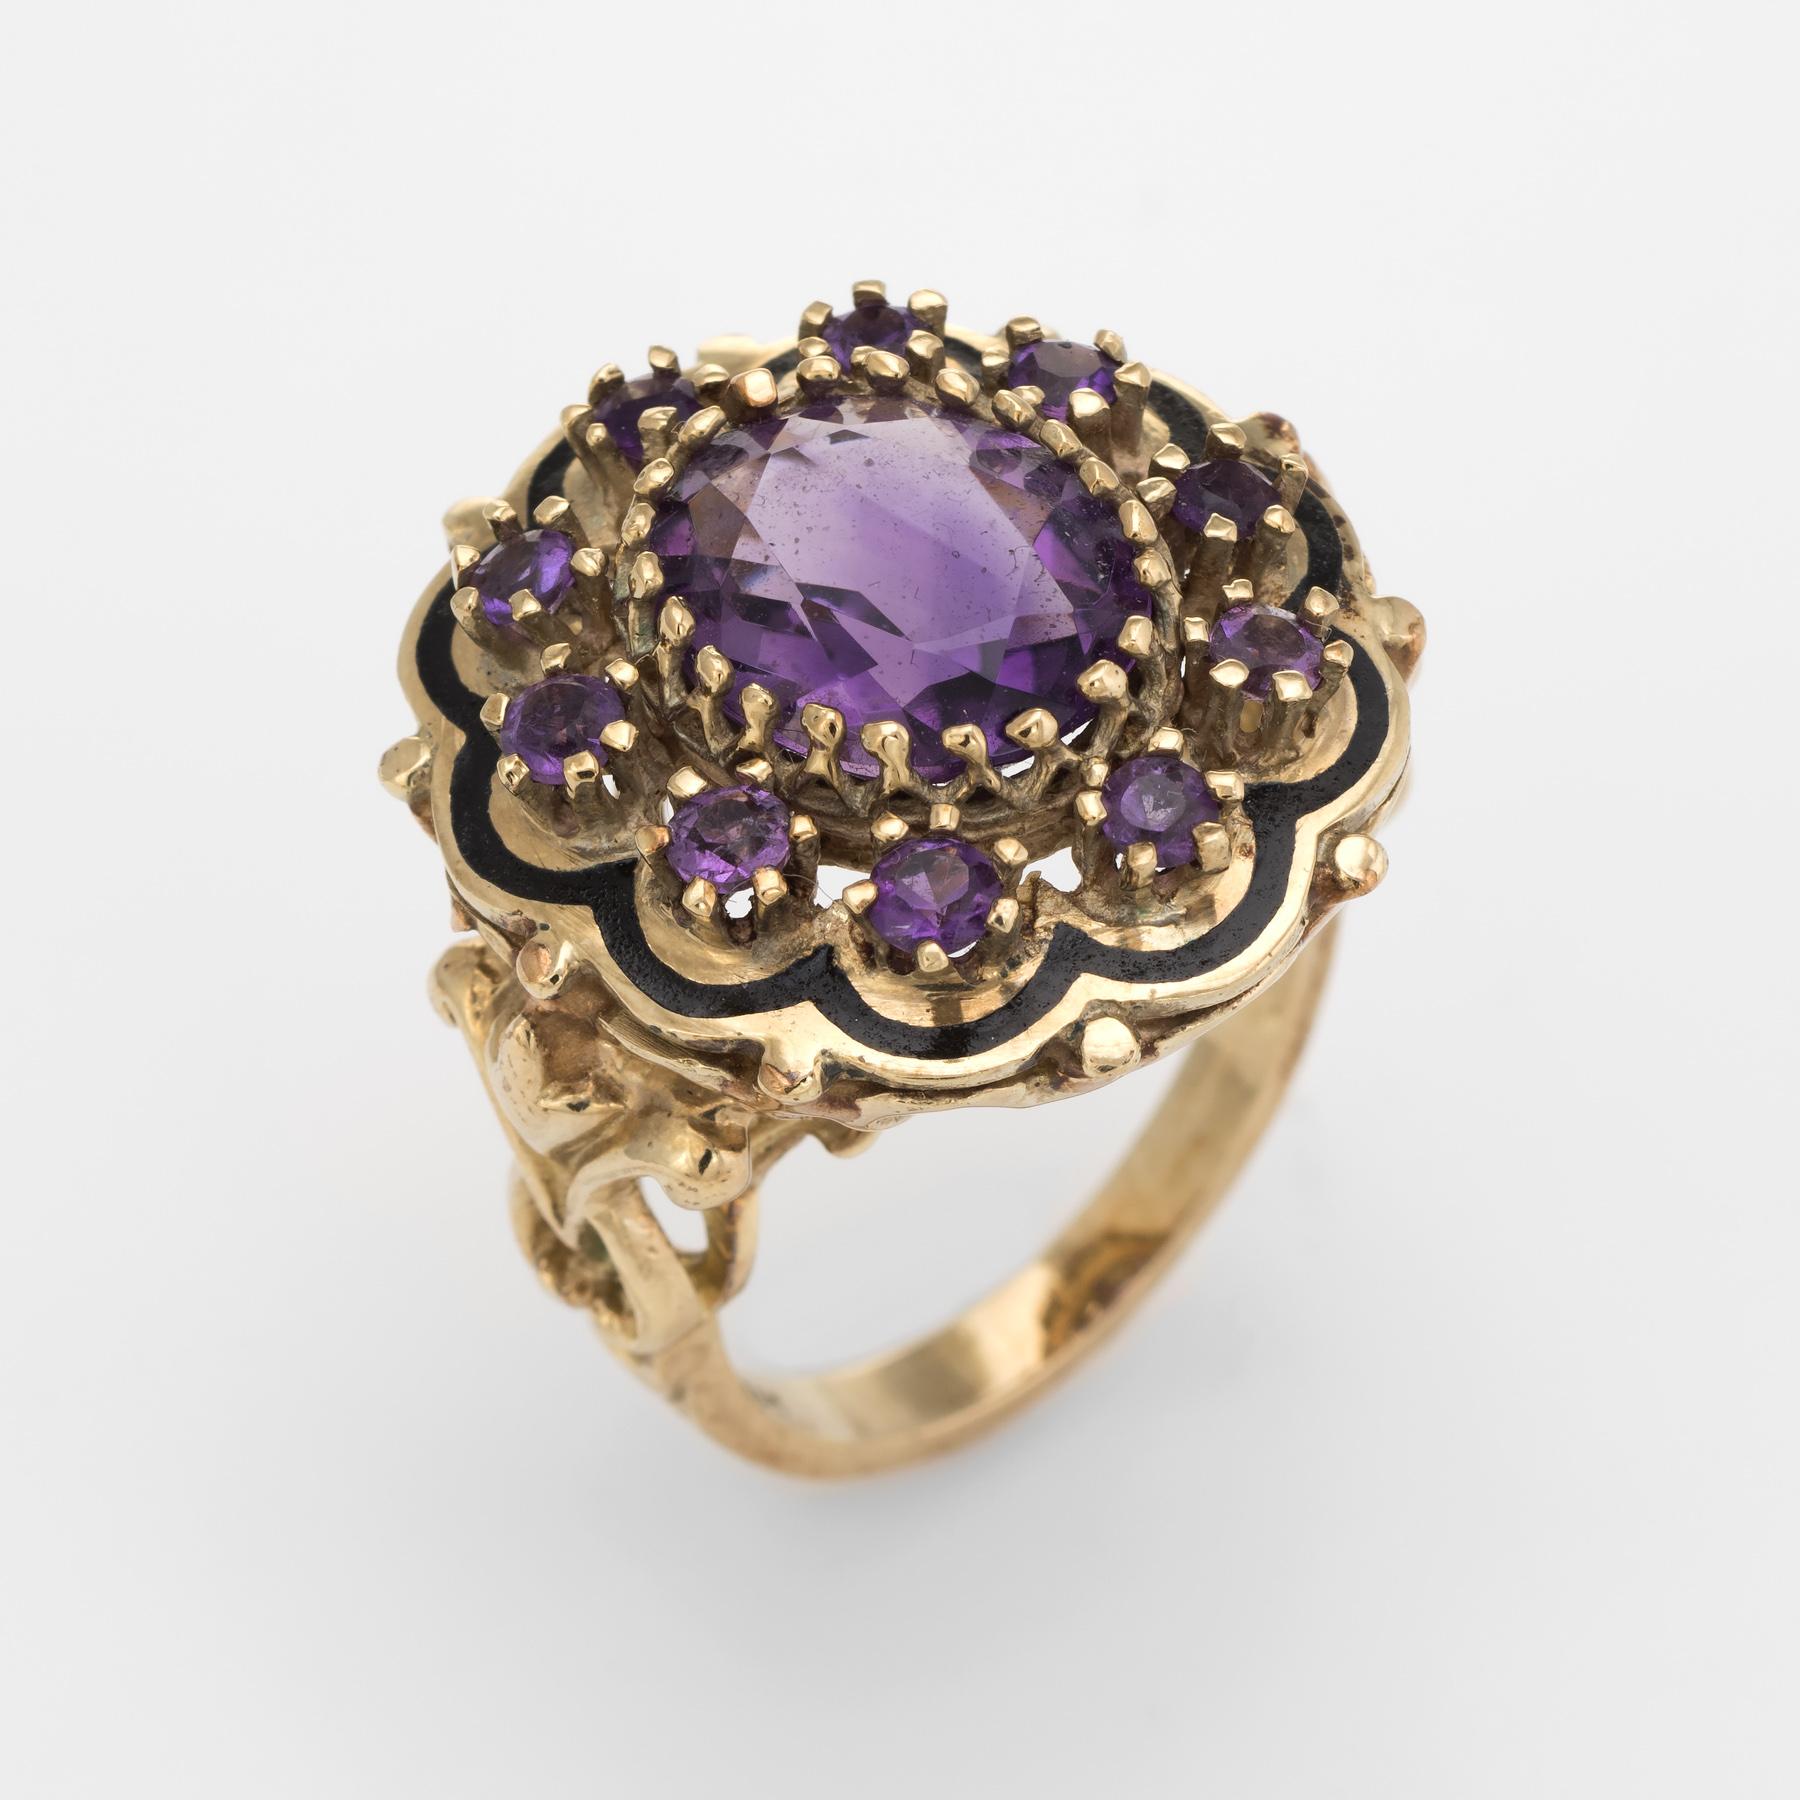 Distinct vintage amethyst cocktail ring, crafted in 14 karat yellow gold. 

Centrally mounted amethyst measures 12mm x 10mm (estimated at 4 carats), accented with 10 x 3mm amethysts. The amethysts are in excellent condition and free of cracks or